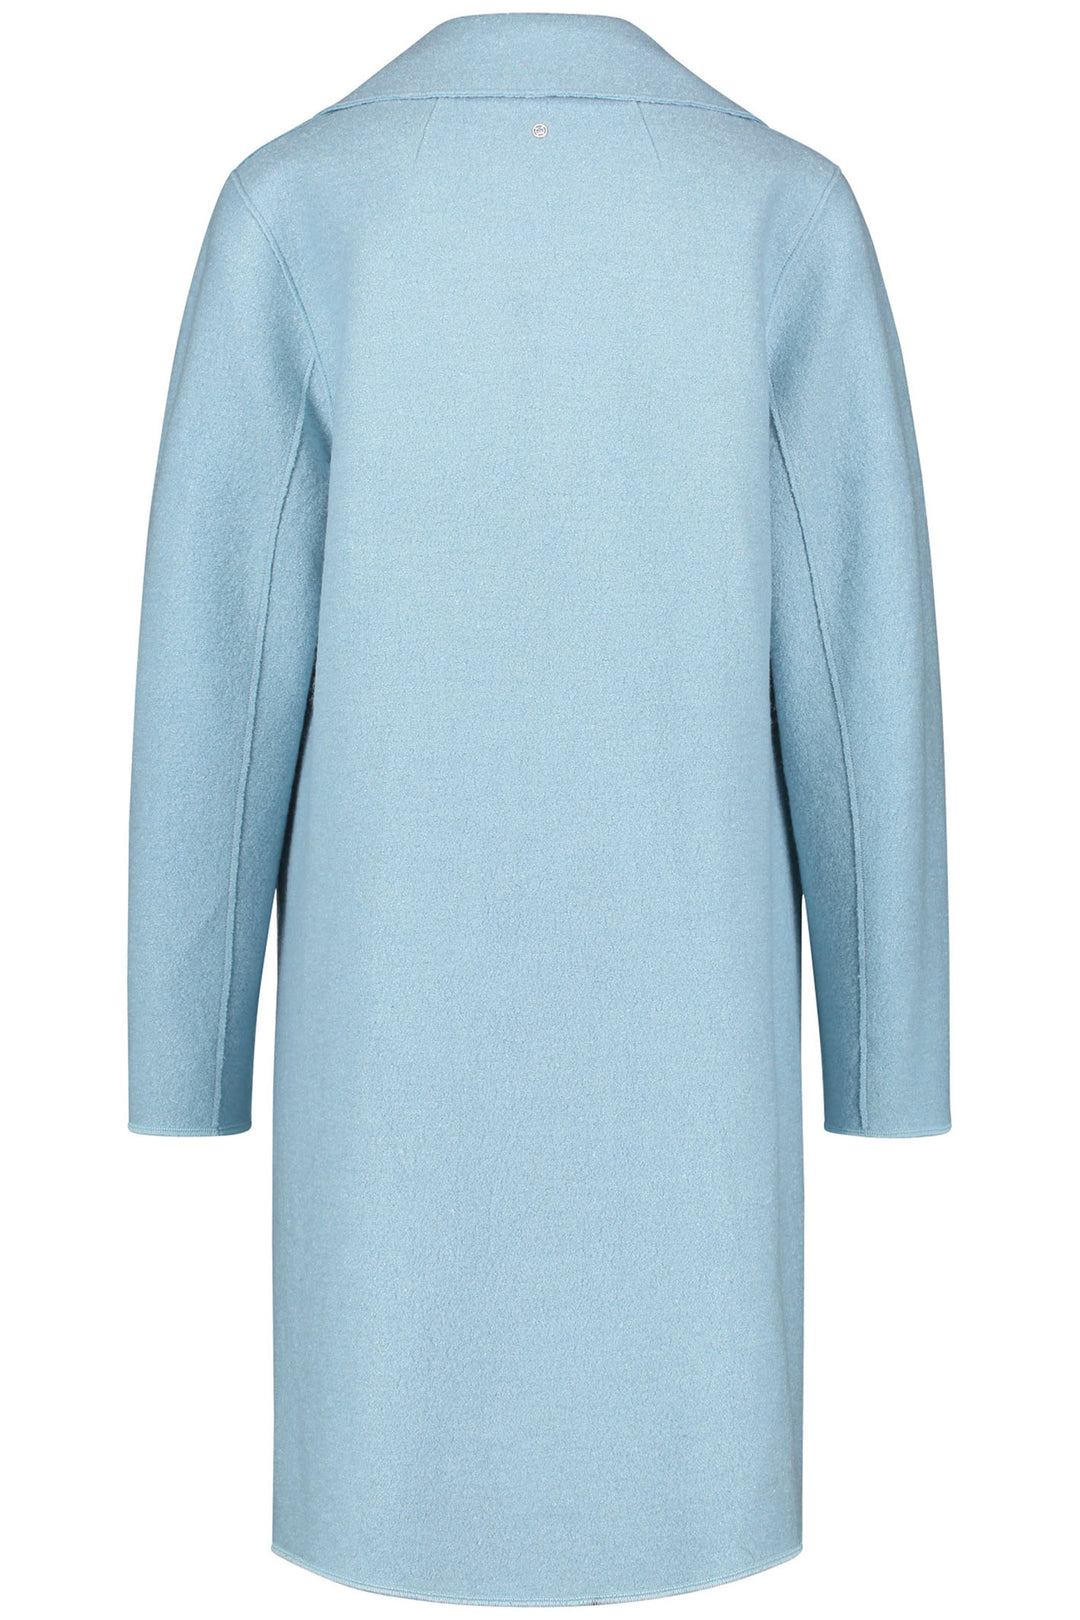 Gerry Weber 350206 80580 Sky Blue Wool Style Coat - Experience Boutique